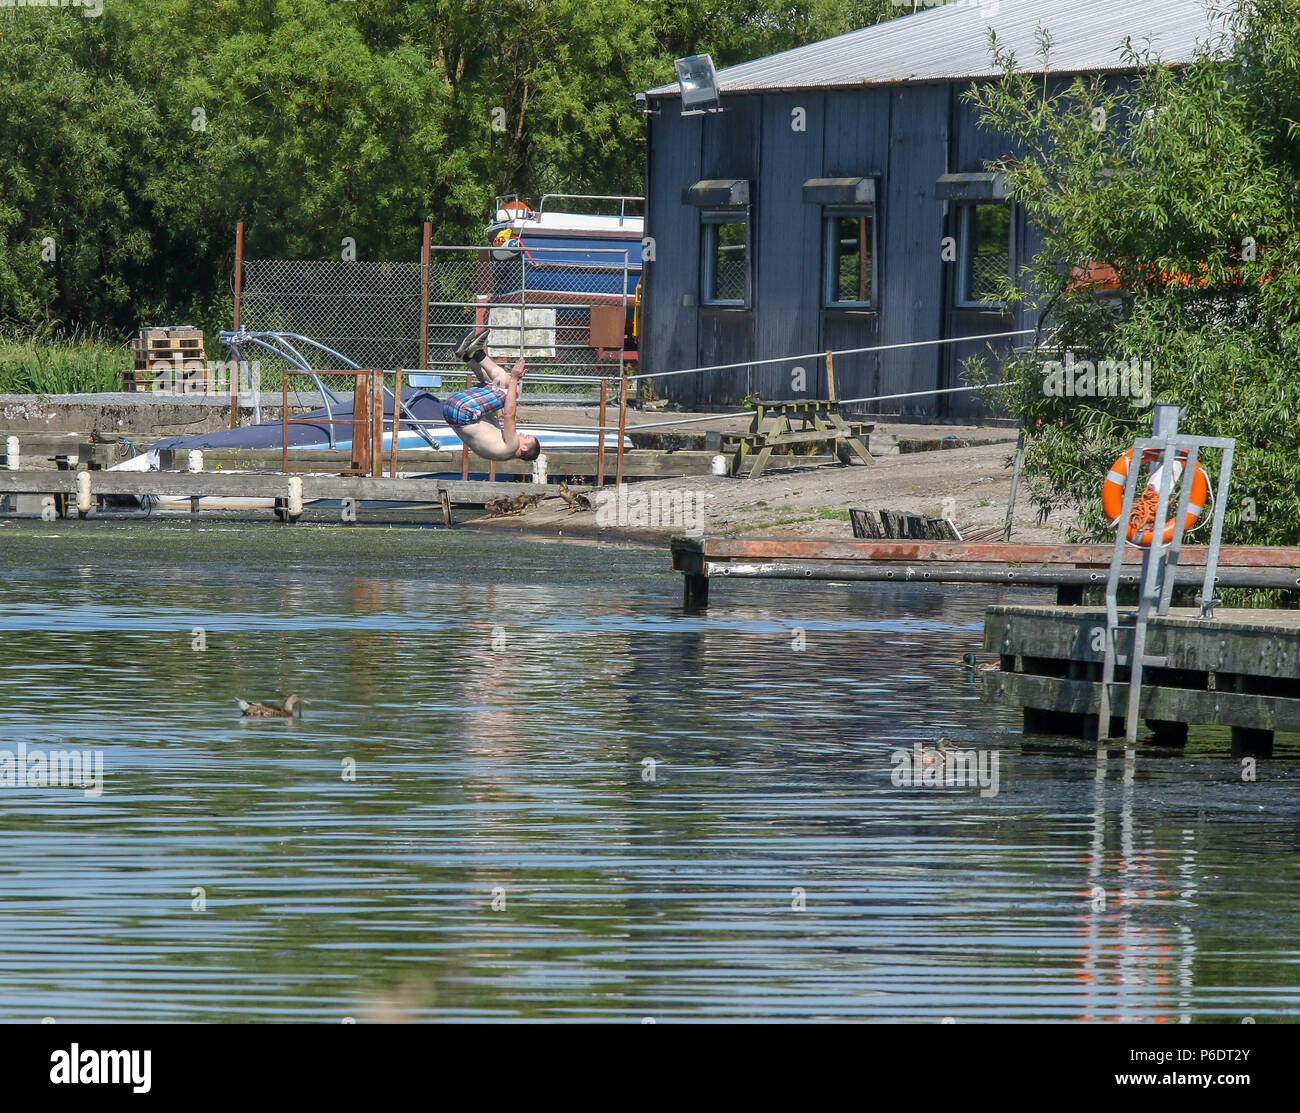 Lough Neagh, Northern Ireland. 29 June 2018. UK weather - another glorious summer day as the heatwave continues. Lough Neagh is the UK's largest freshwater lake and with weather like this it's a great place to enjoy the best summer in decades. A young man somersaulting into the water at Kinnego marina. Credit: David Hunter/Alamy Live News. Stock Photo